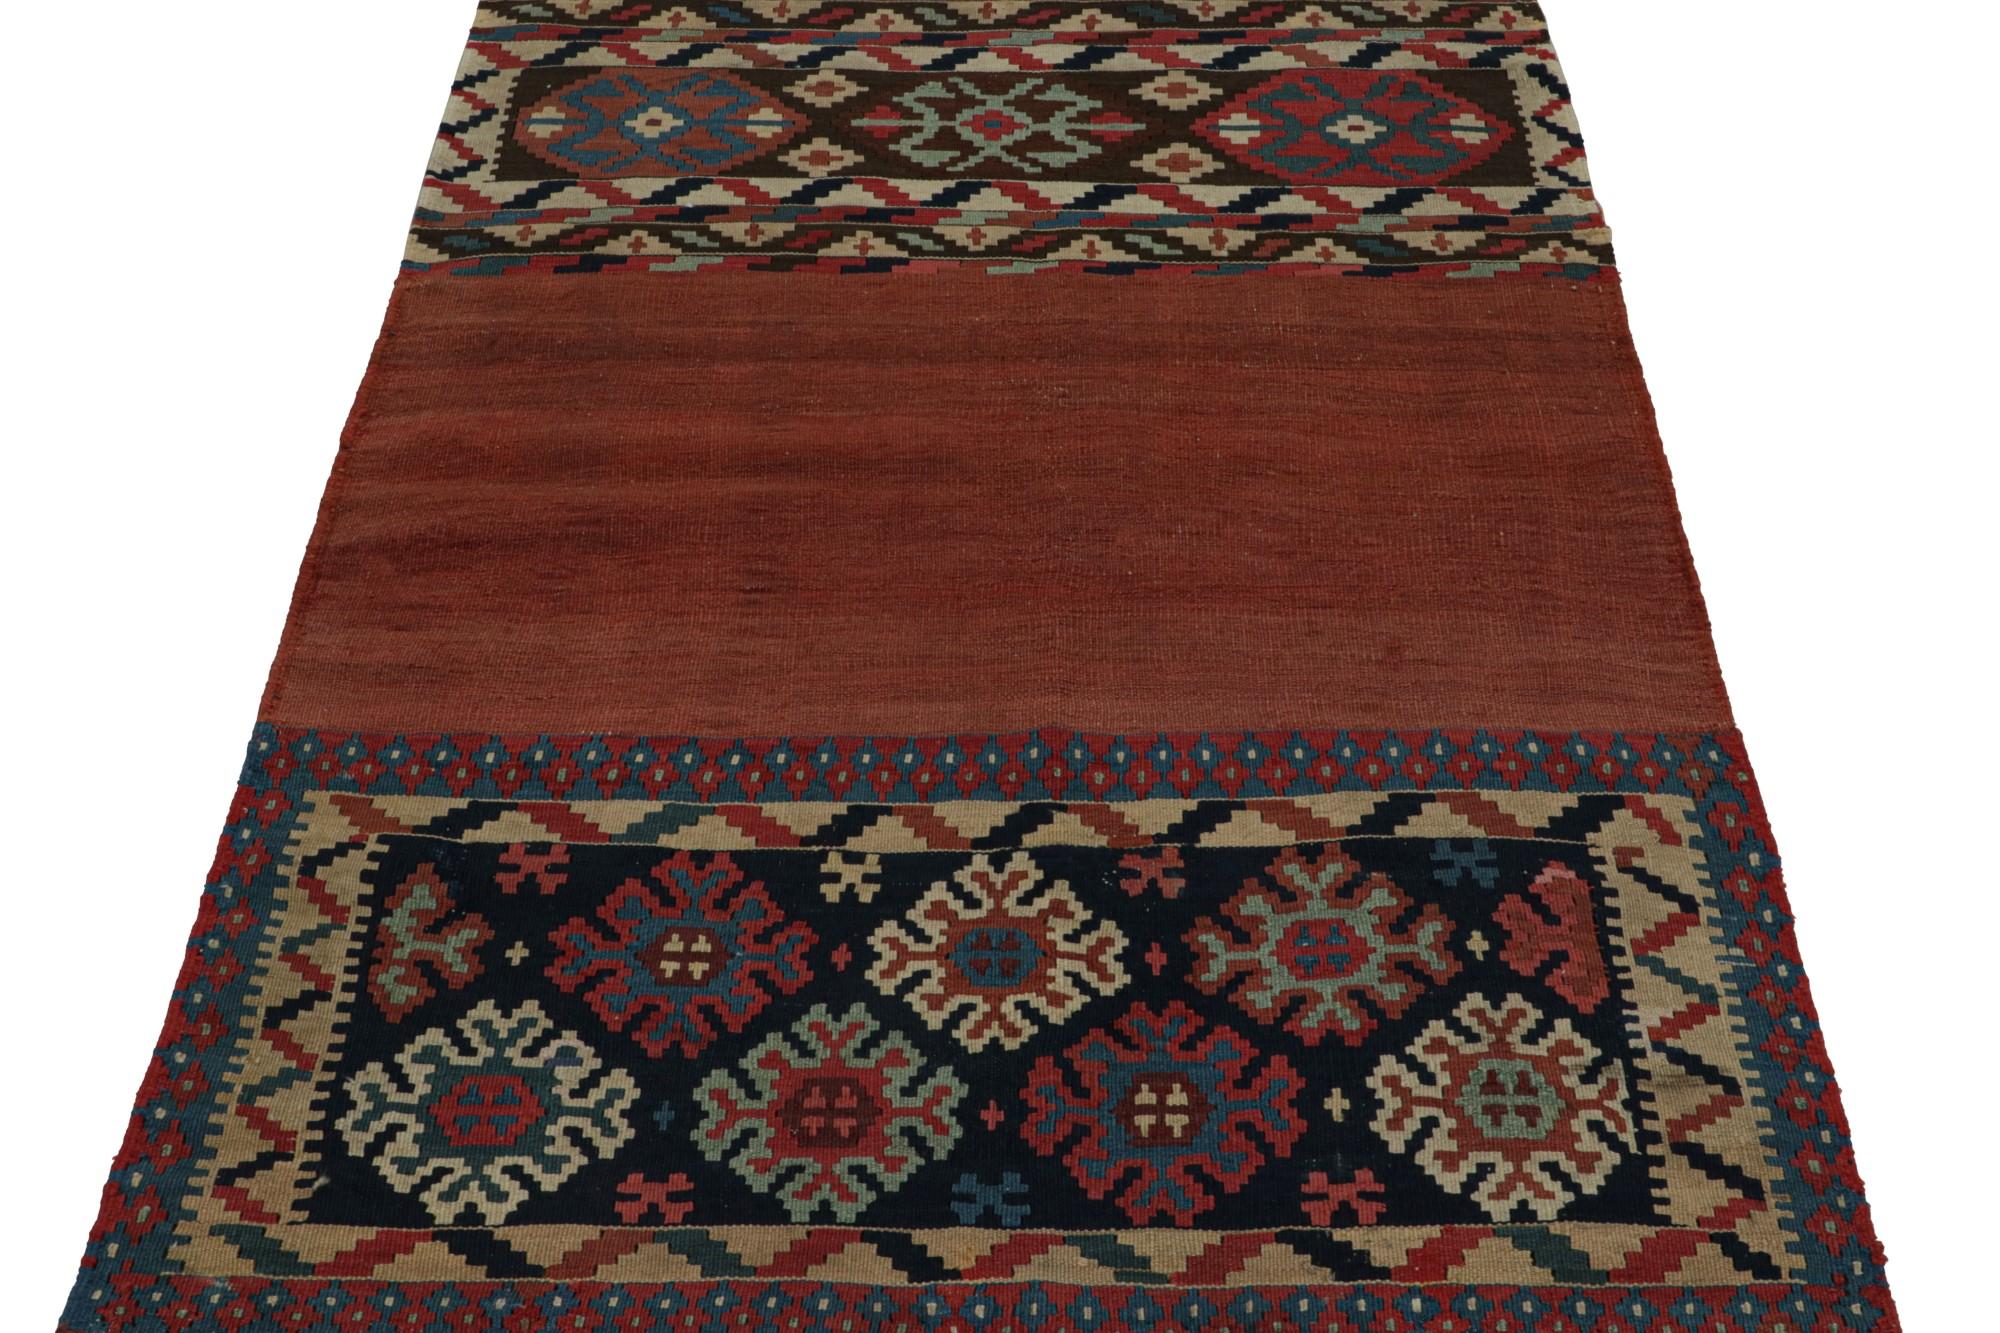 Modern Rug & Kilim’s Afghan Tribal Kilim Rug in Red, with Colorful Geometric Patterns For Sale